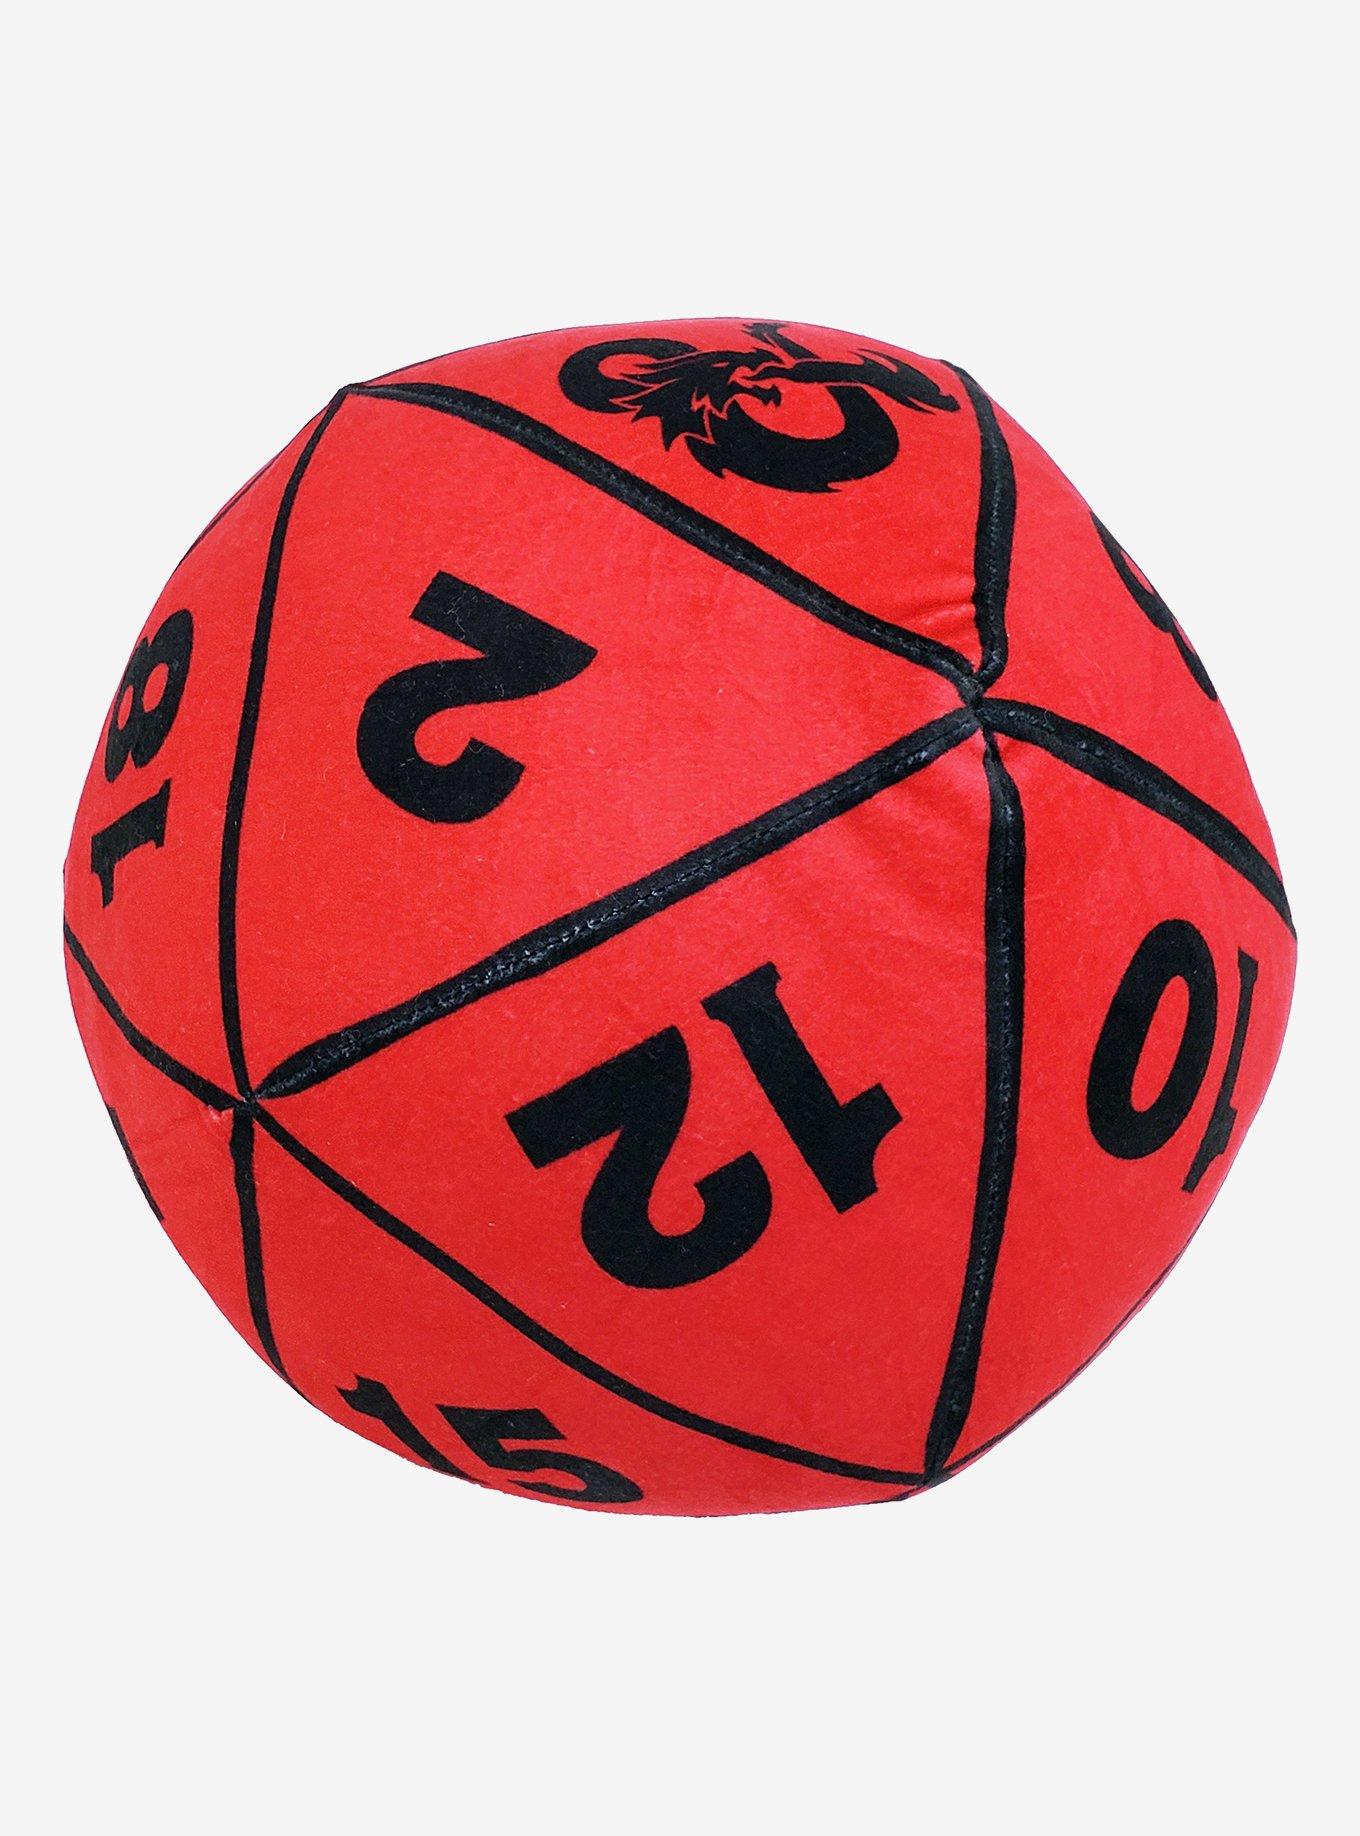 Dungeons And Dragons Red D20 Dice Travel Cloud Pillow